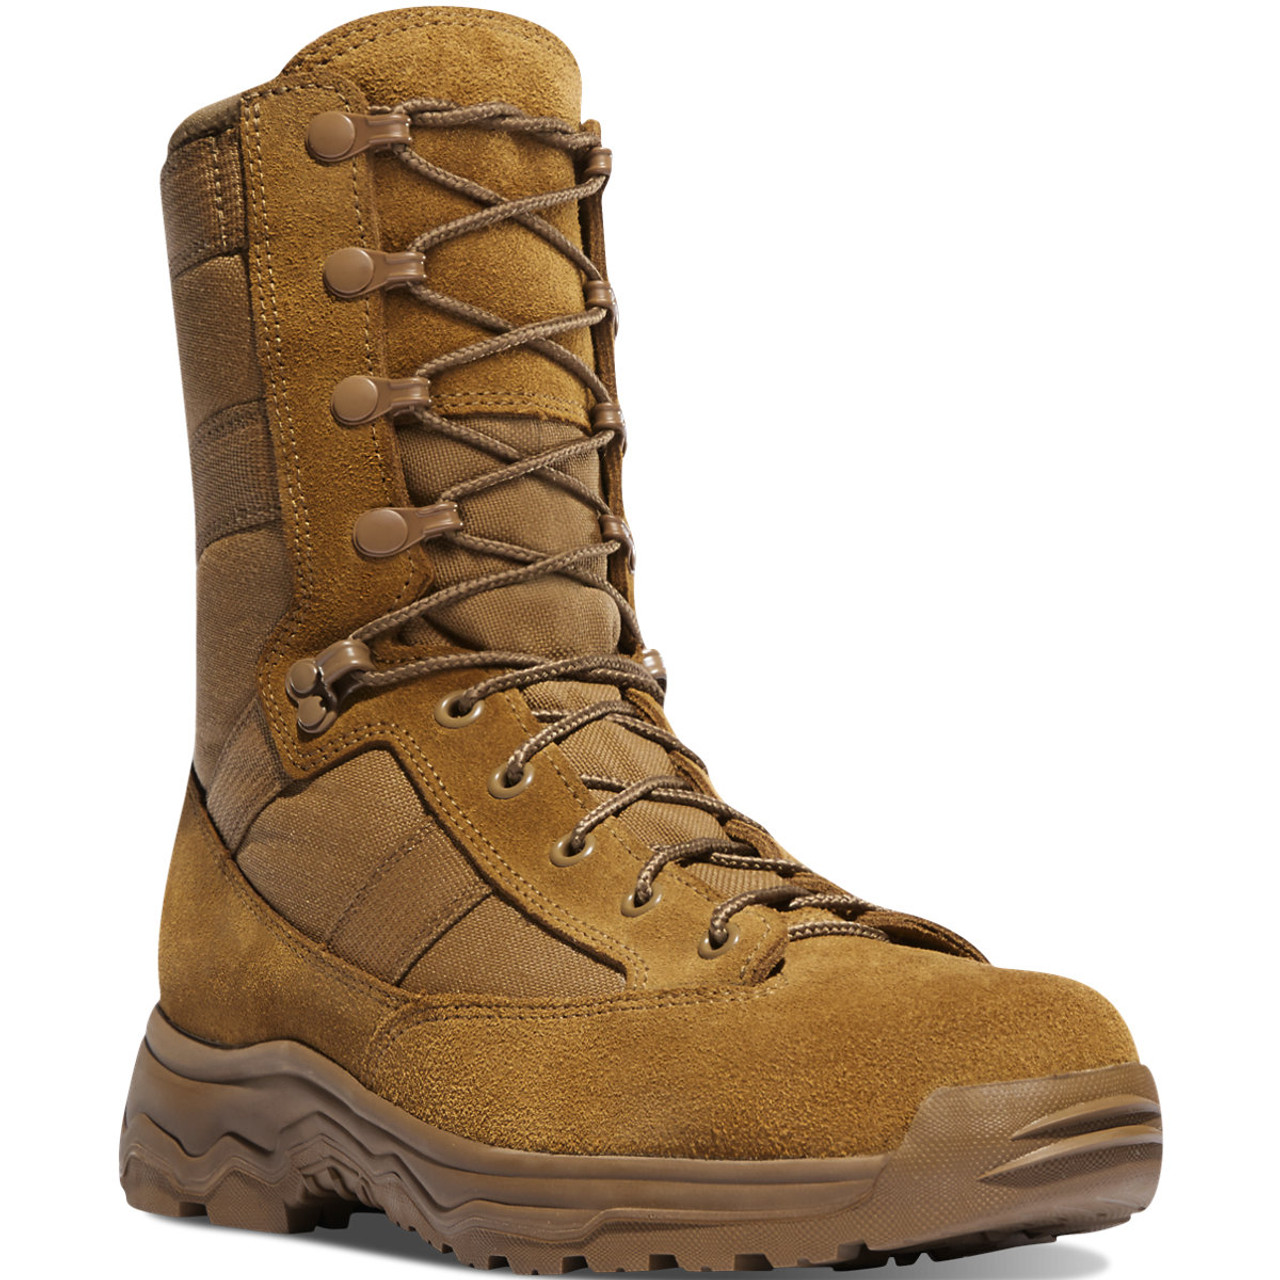 DANNER® RECKONING 400G INSULATED 8" MILITARY COYOTE BOOTS 53225